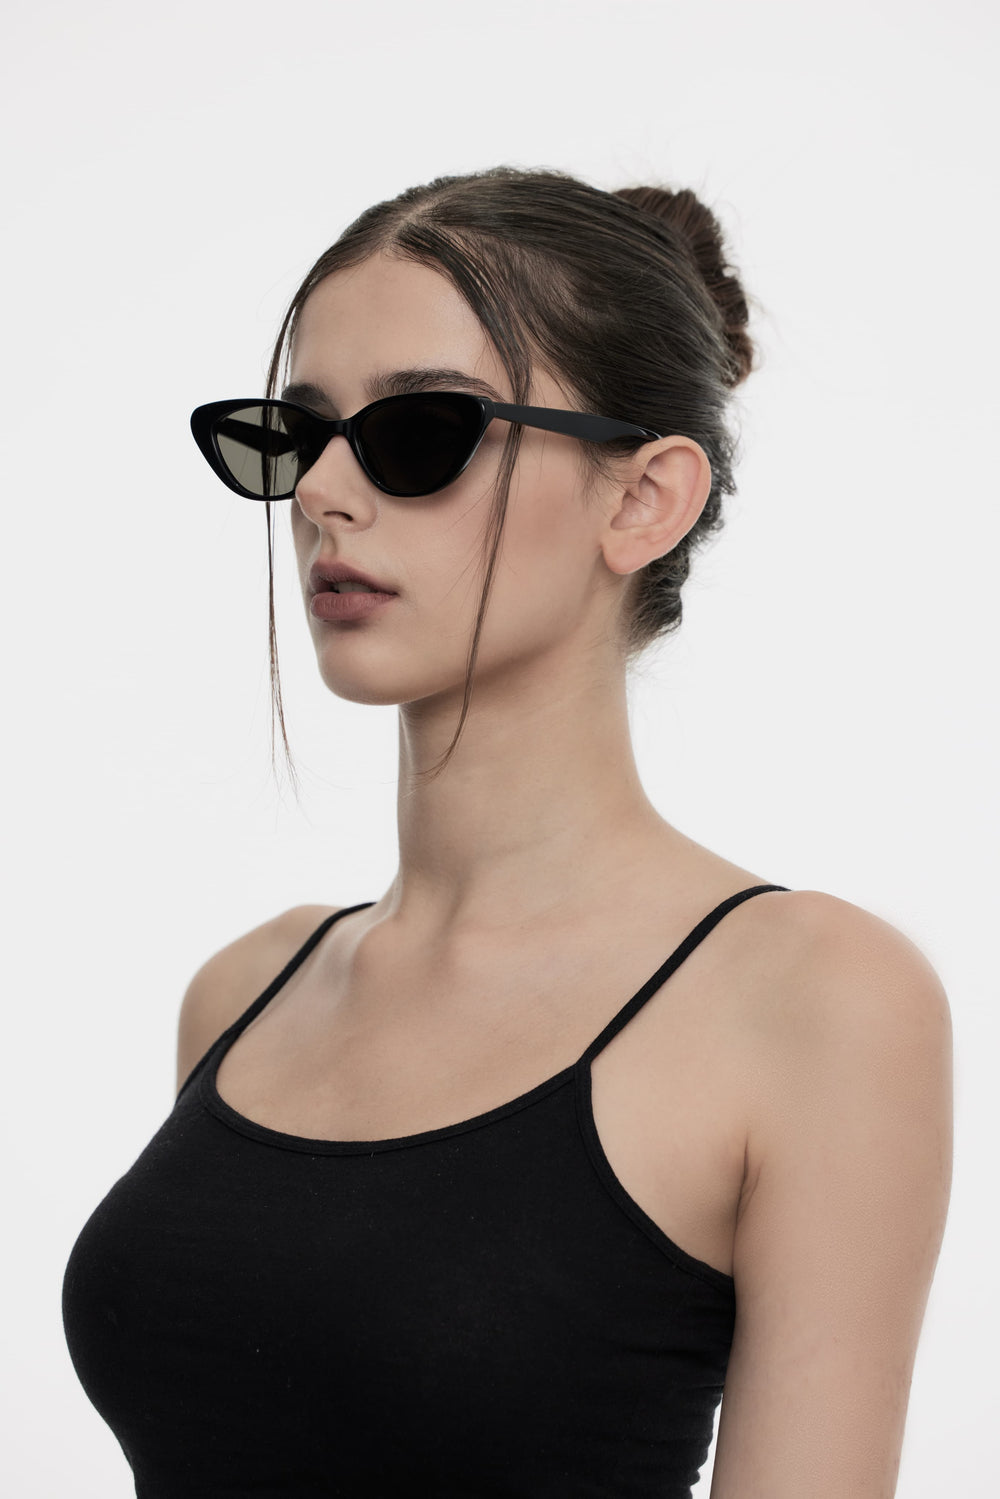 Model showcasing side view of Lust Korean Fashion Dawn in black cat-eye Sunglasses from Mercury Retrograde's Daydream Collection